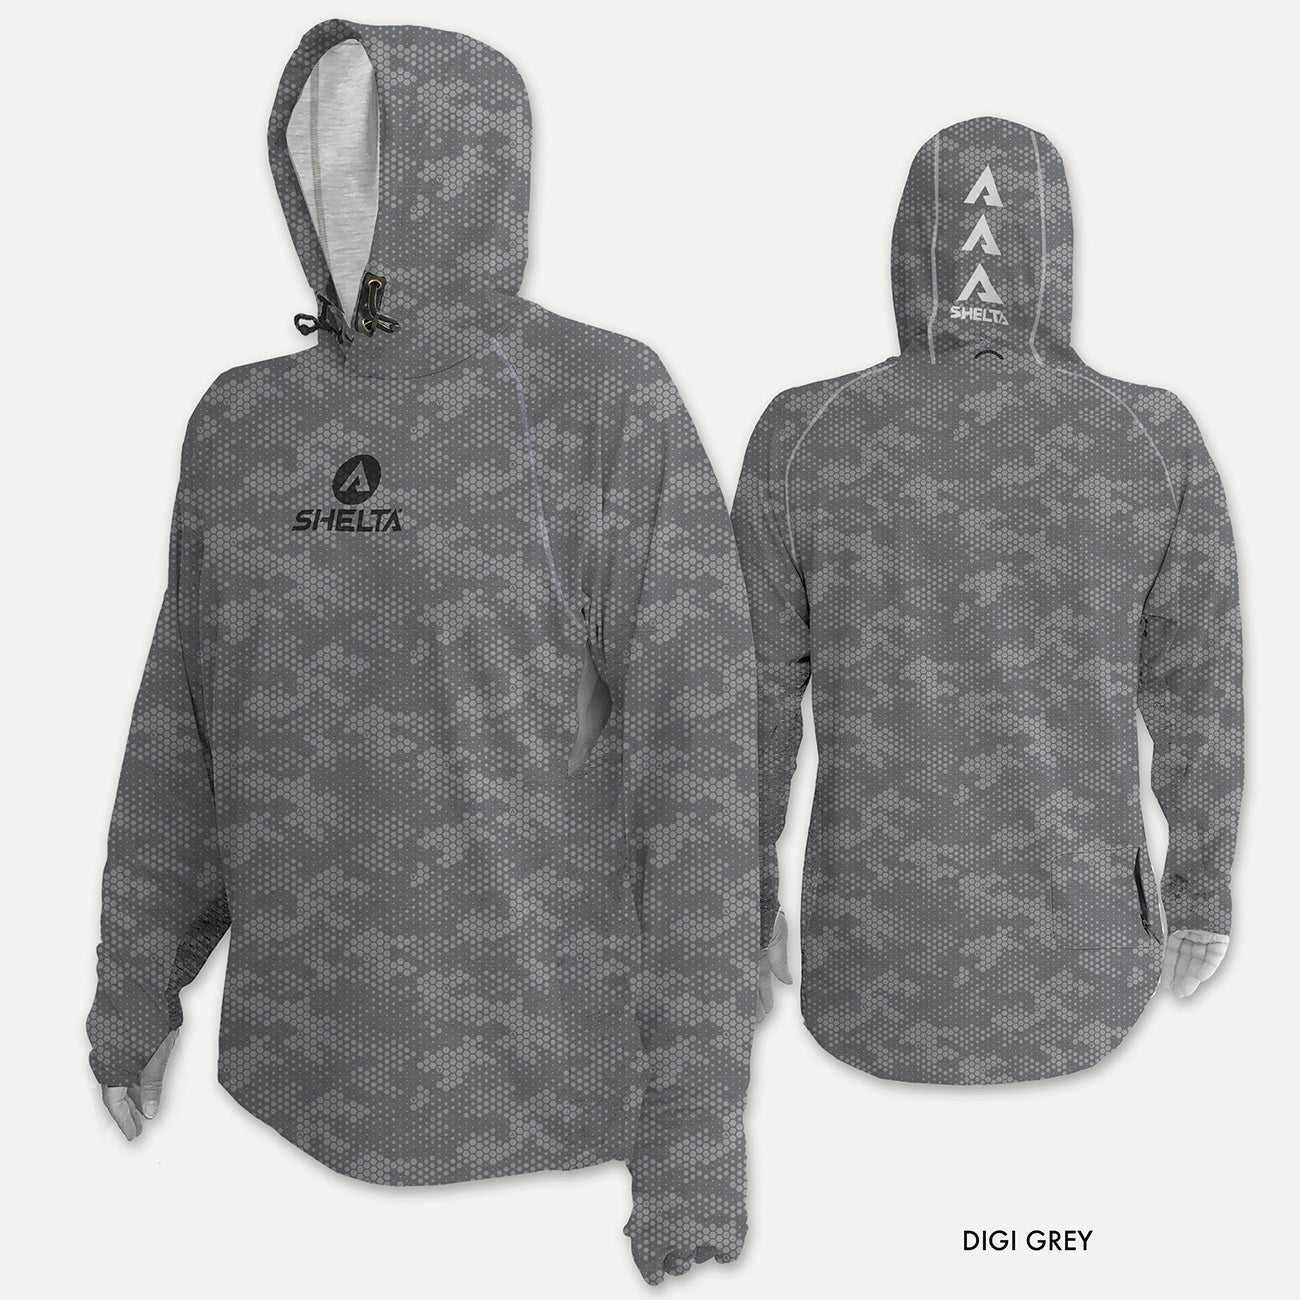 The Assault Hoodie in Digi Grey is engineered & built with sun protection, function, and durability in mind. Offering features consistent with Shelta core values and innovation goals. UPF 50+ UV protection, the highest rating given. Blocks 98% of UVA/UVB radiation Loose comfort fit Moisture Wicking Sleeves with thumb hole & finger loop for multiple hand protection options